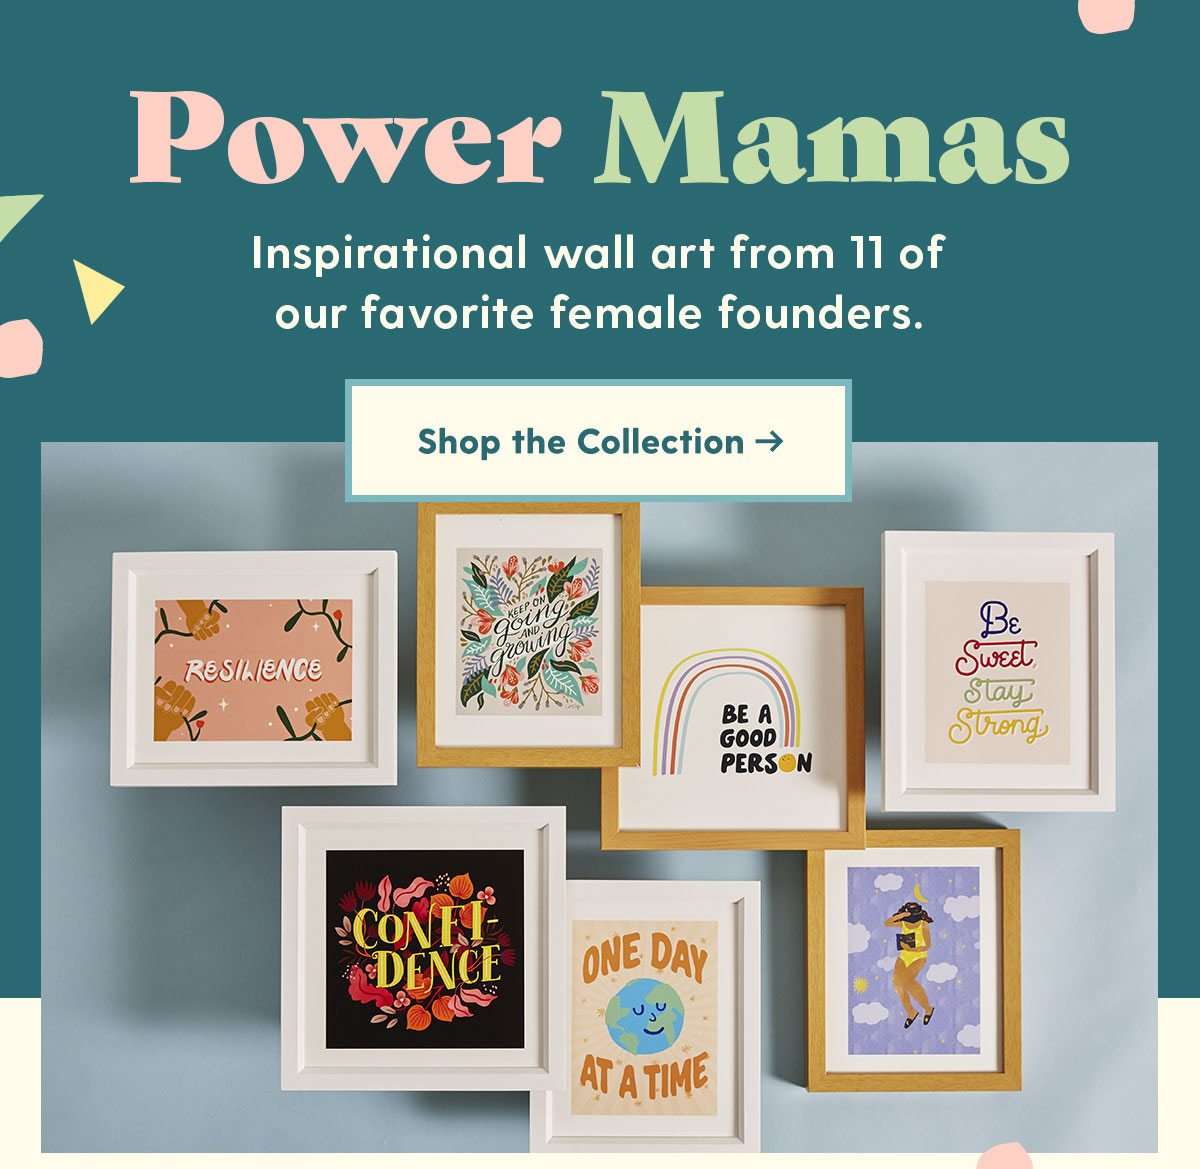 Power Mamas. Inspirational wall art from 11 of our favorite female founders. Shop the Collection